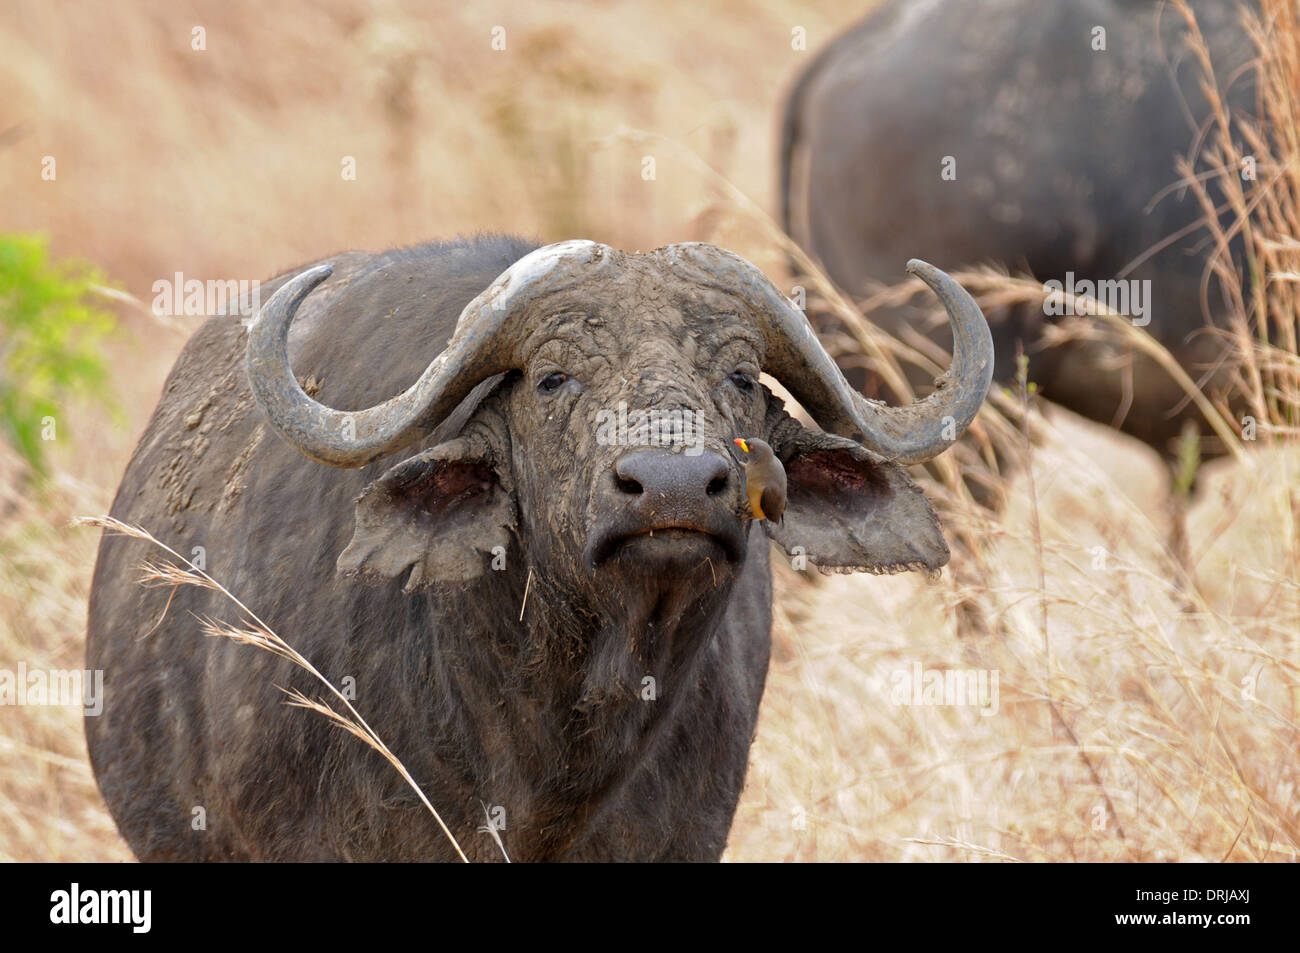 Cape buffalo (Syncerus caffer) with yellow-billed oxpecker (Buphagus africanus) searching for food on it's head. Stock Photo